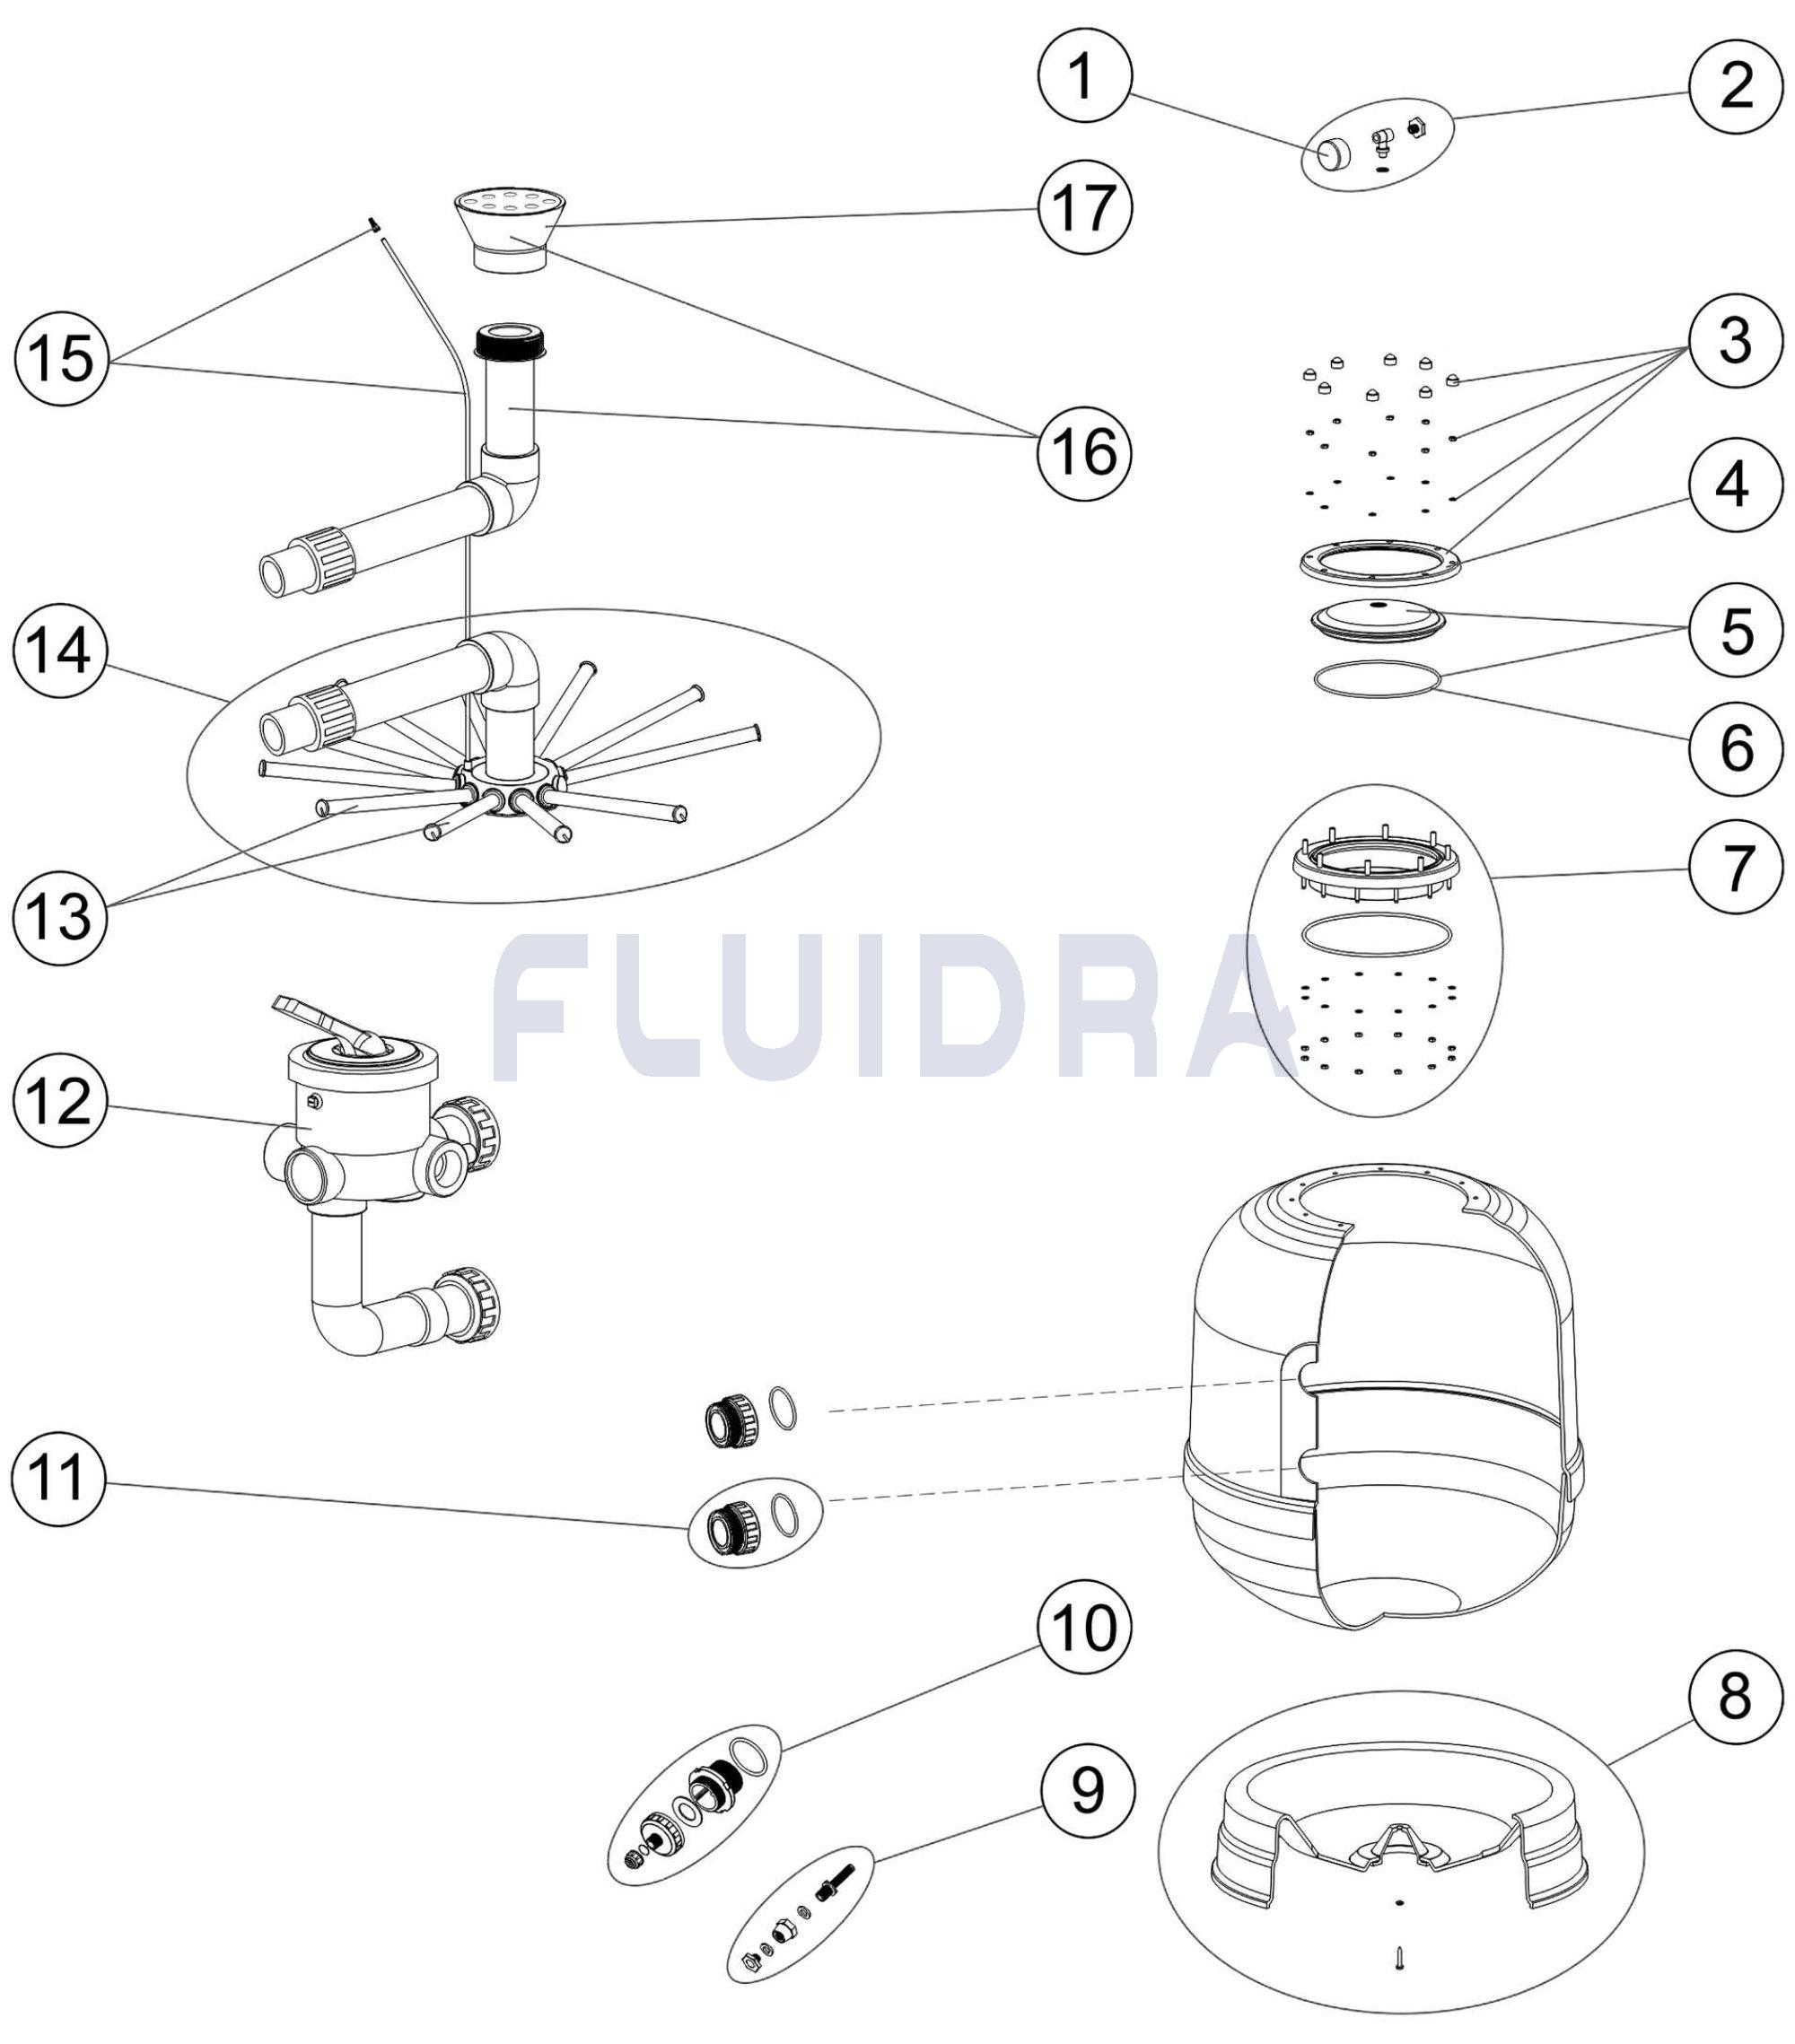 https://spareparts.astralpool.com/en/exploded-view.php?producto=WF000094